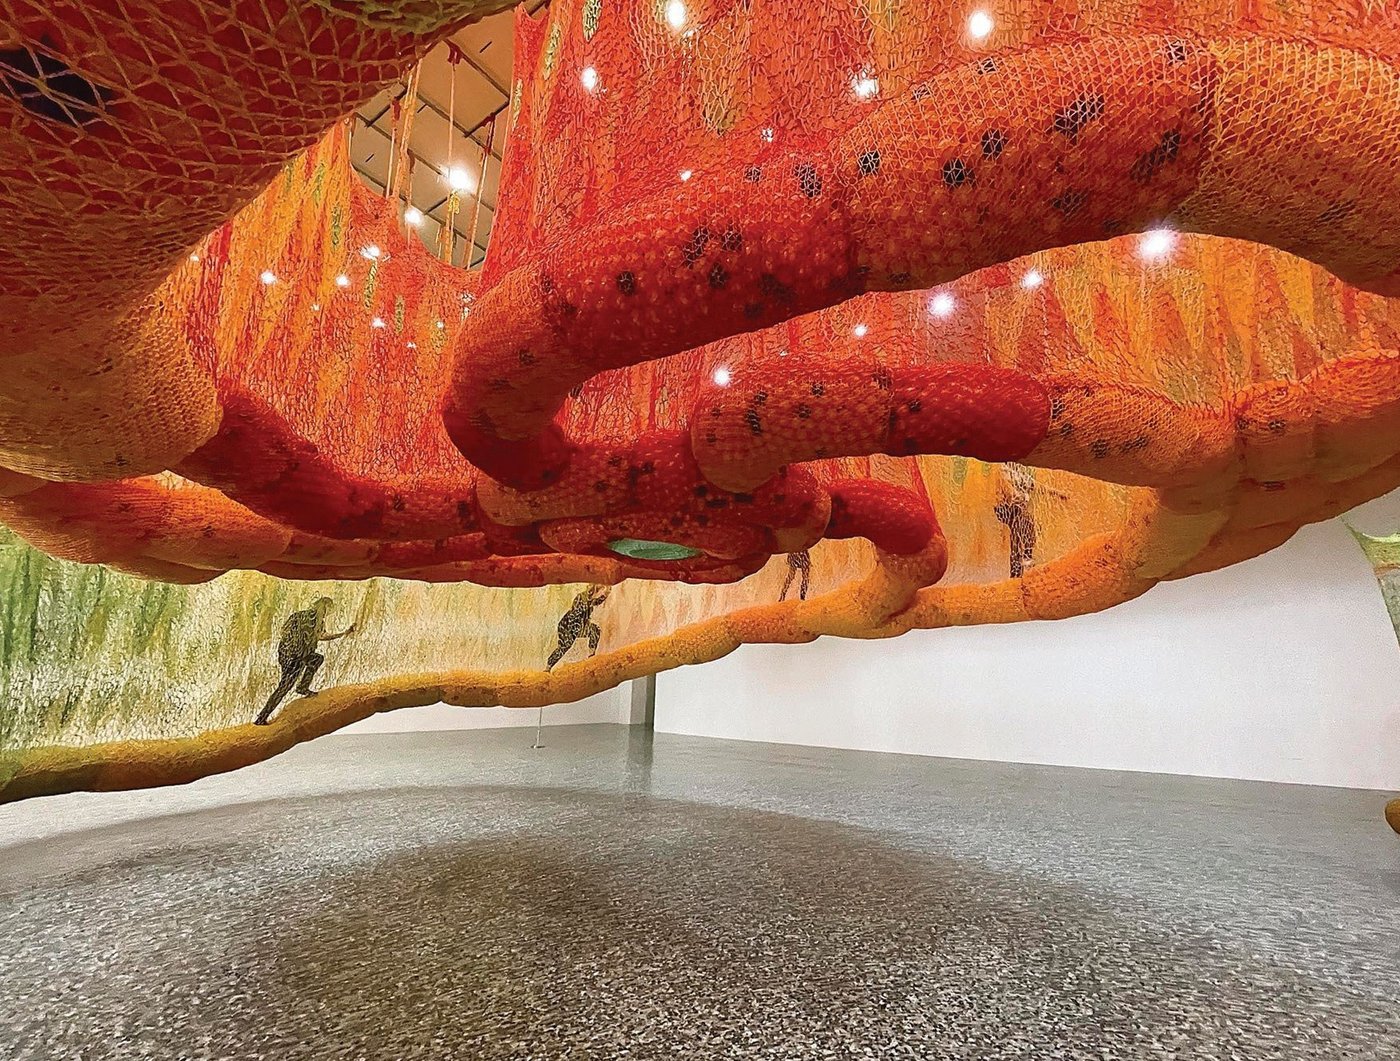 Ernesto Neto, “SunForceOceanLife” (2020, crocheted textile and plastic balls), installation view at The Museum of Fine Arts. “SUNFORCEOCEANLIFE,” THE MUSEUM OF FINE ARTS, HOUSTON, MUSEUM PURCHASE FUNDED BY THE CAROLINE WIESS LAW ACCESSIONS ENDOWMENT FUND, ©2020 ERNESTO NETO, PHOTO BY ALBERT SANCHEZ